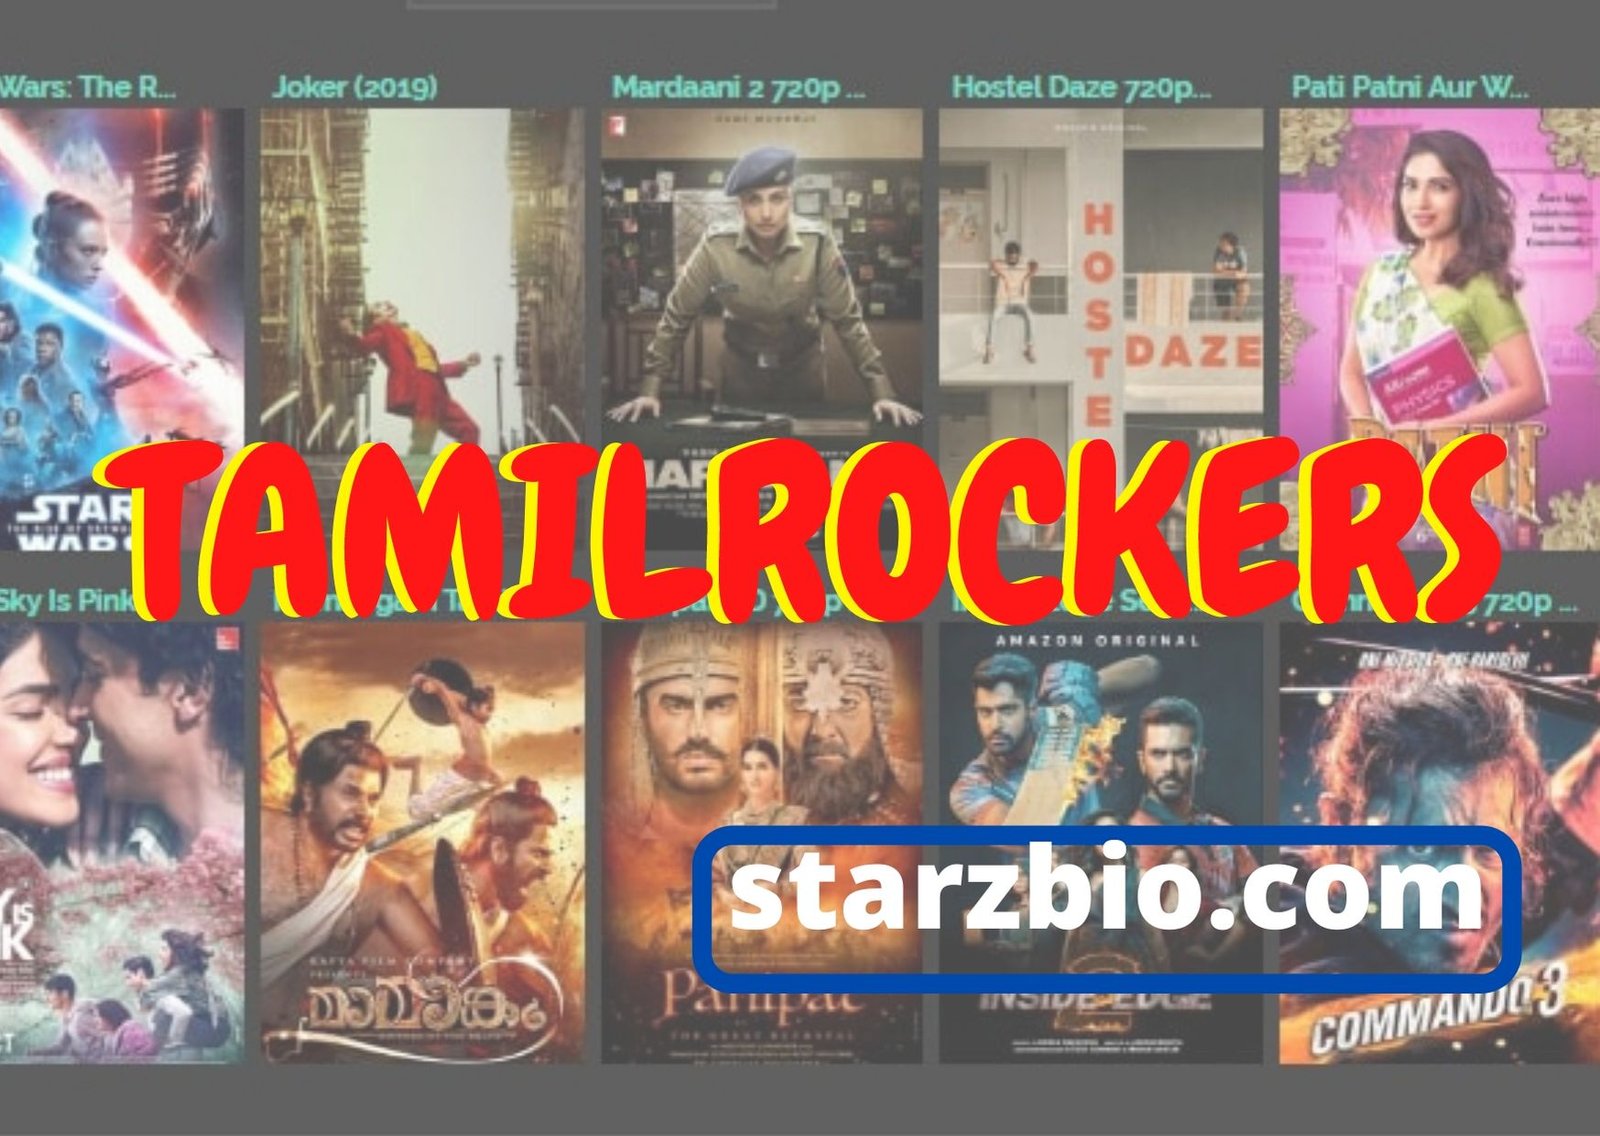 Tamilrockers Illegal Hd Movies Watch And Download Website 1080p hd tamil movies download is also available on our site. tamilrockers illegal hd movies watch